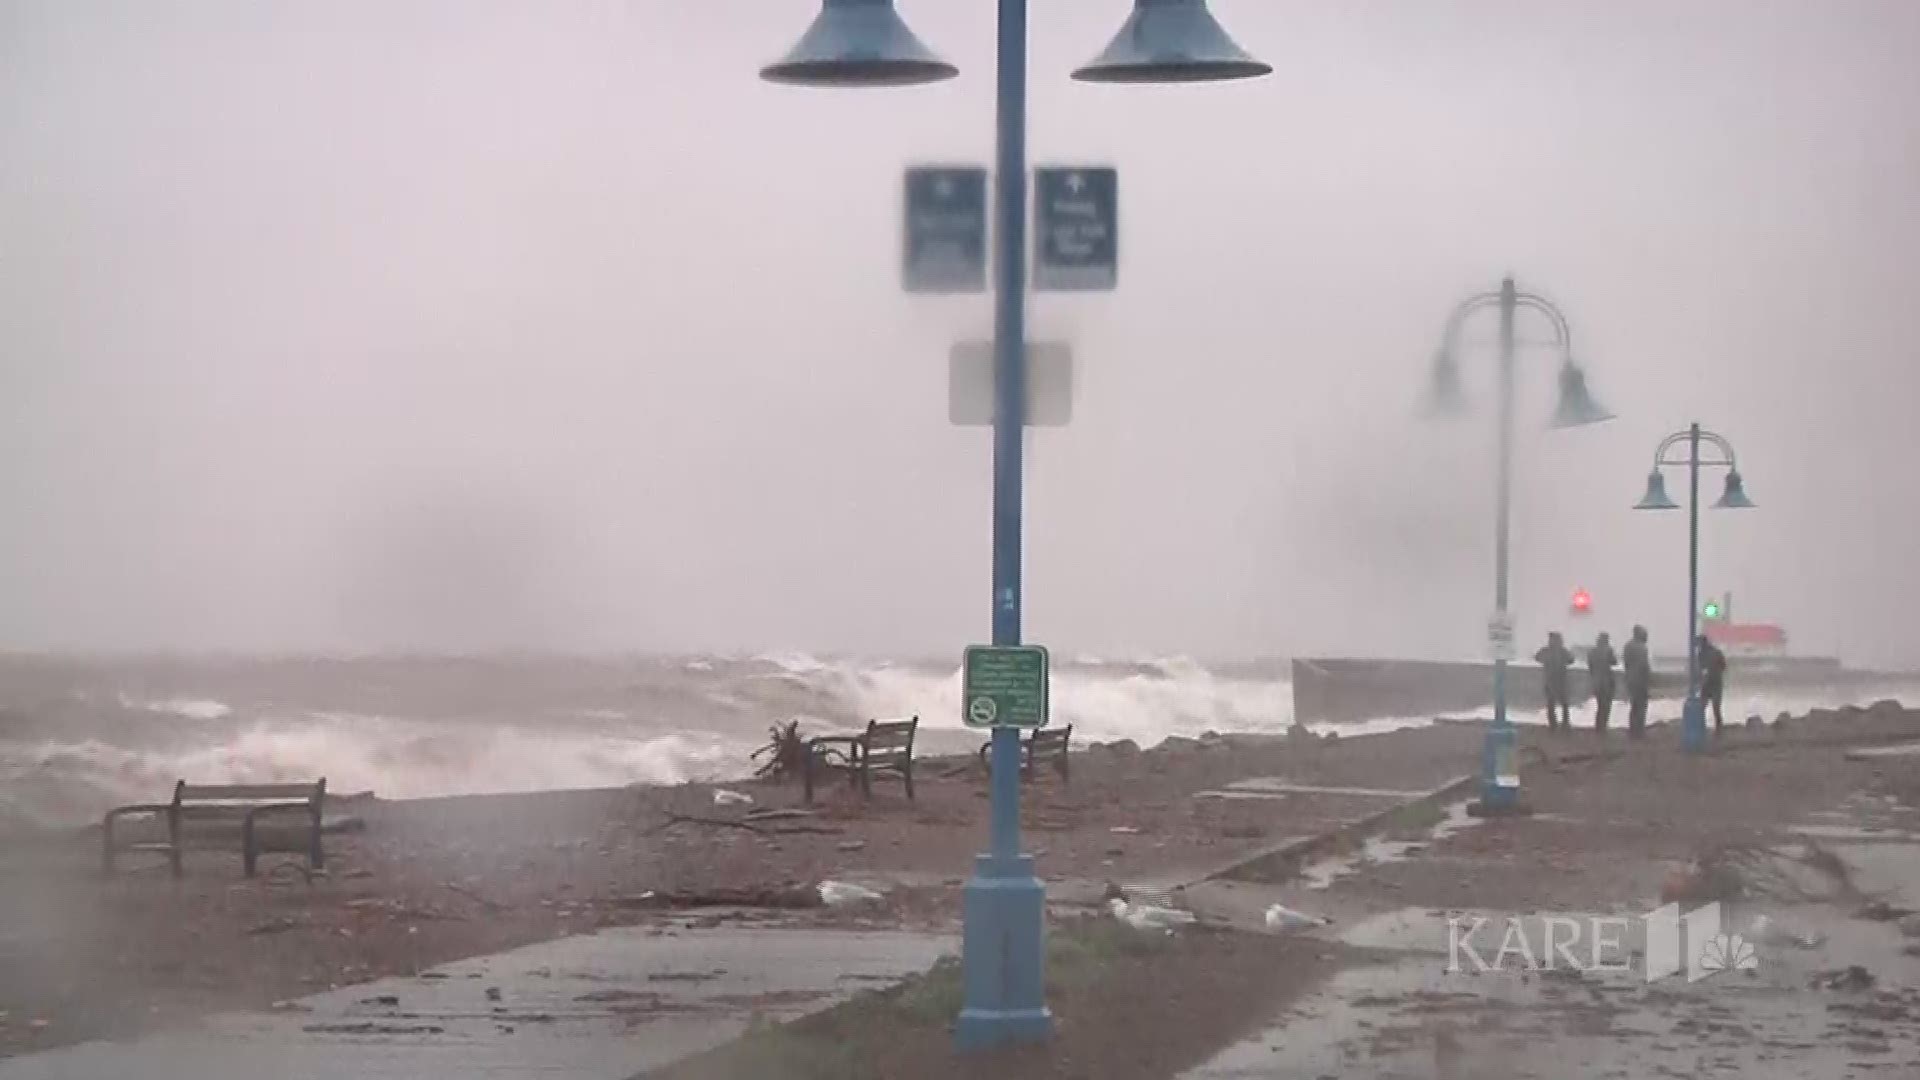 Huge gusts caused waves and flooding in Duluth's Canal Park area on Wednesday. Check out this video from KARE 11's sister station, KBJR.